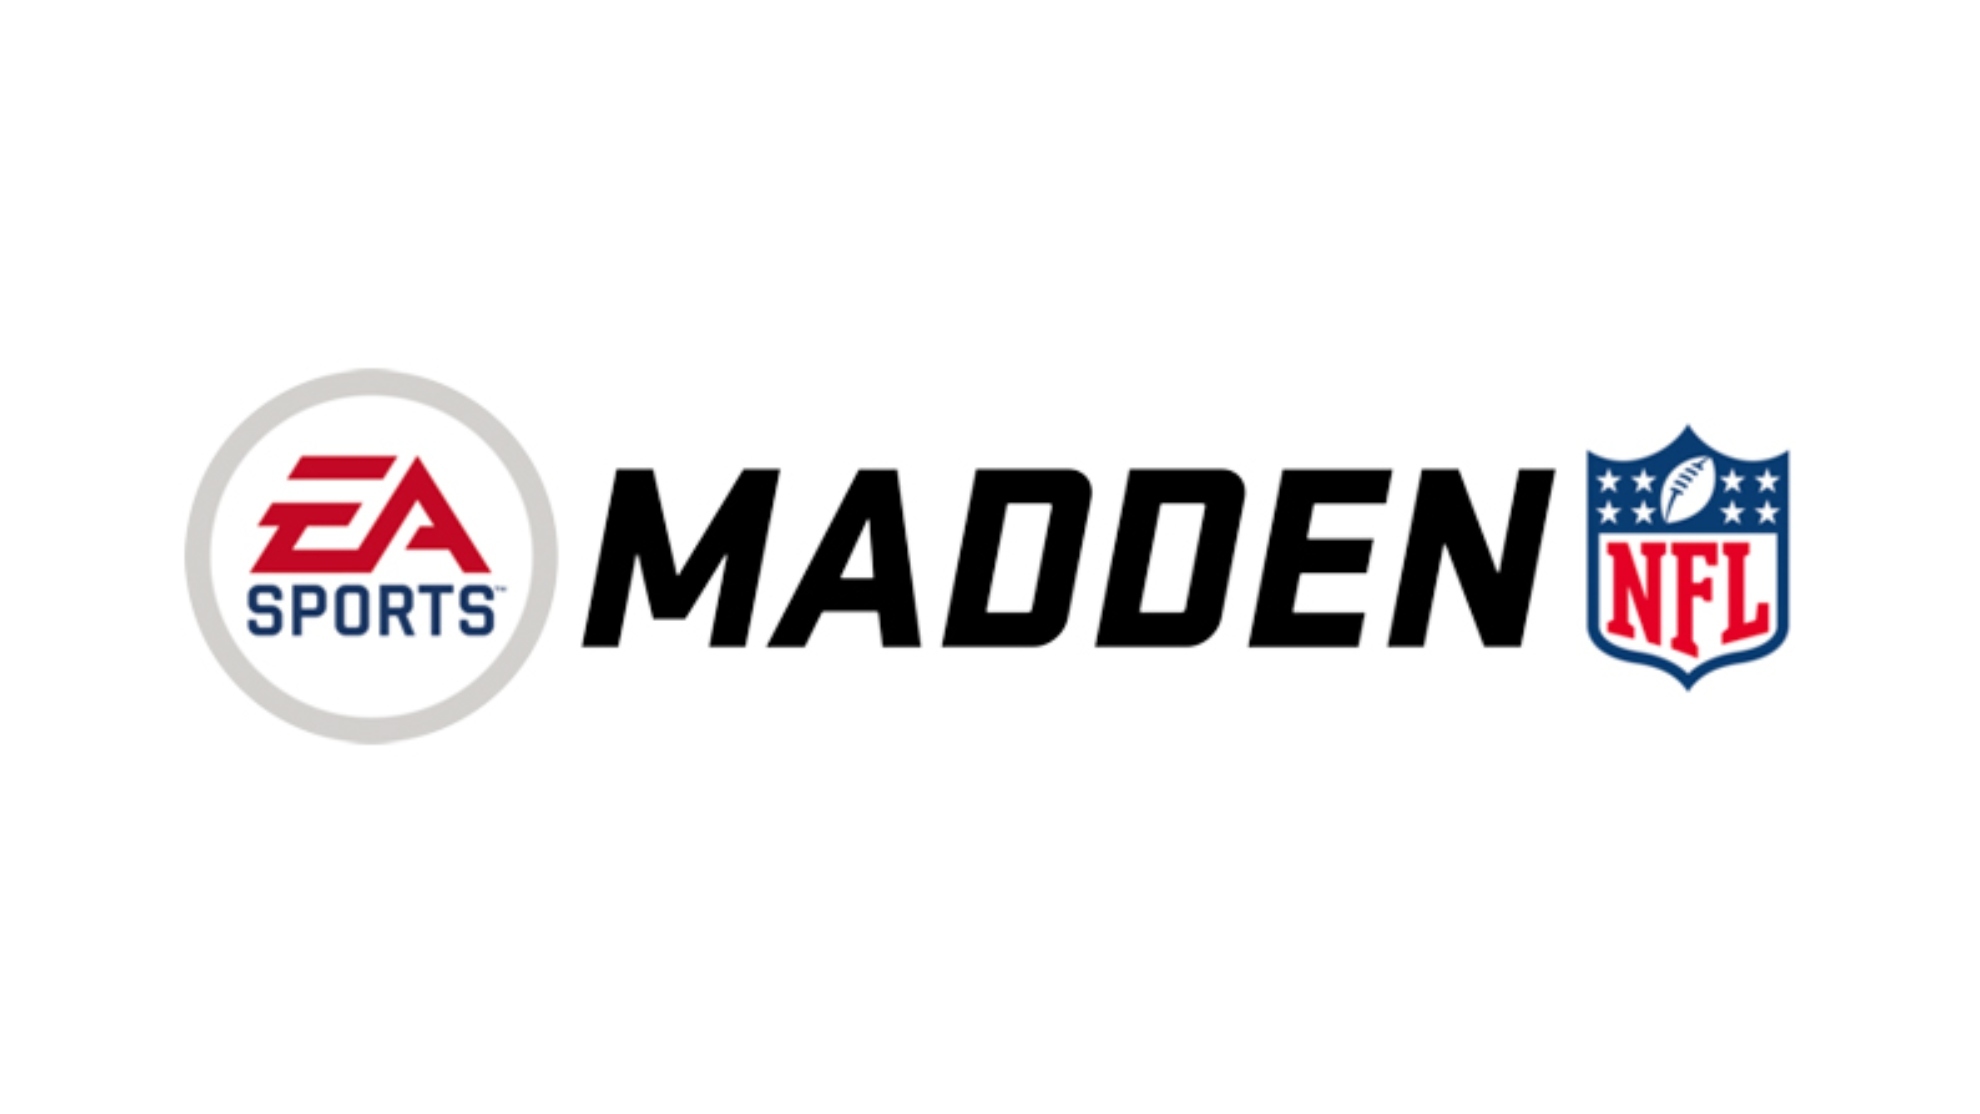 John Madden's videogame legacy with his EA Sports franchise